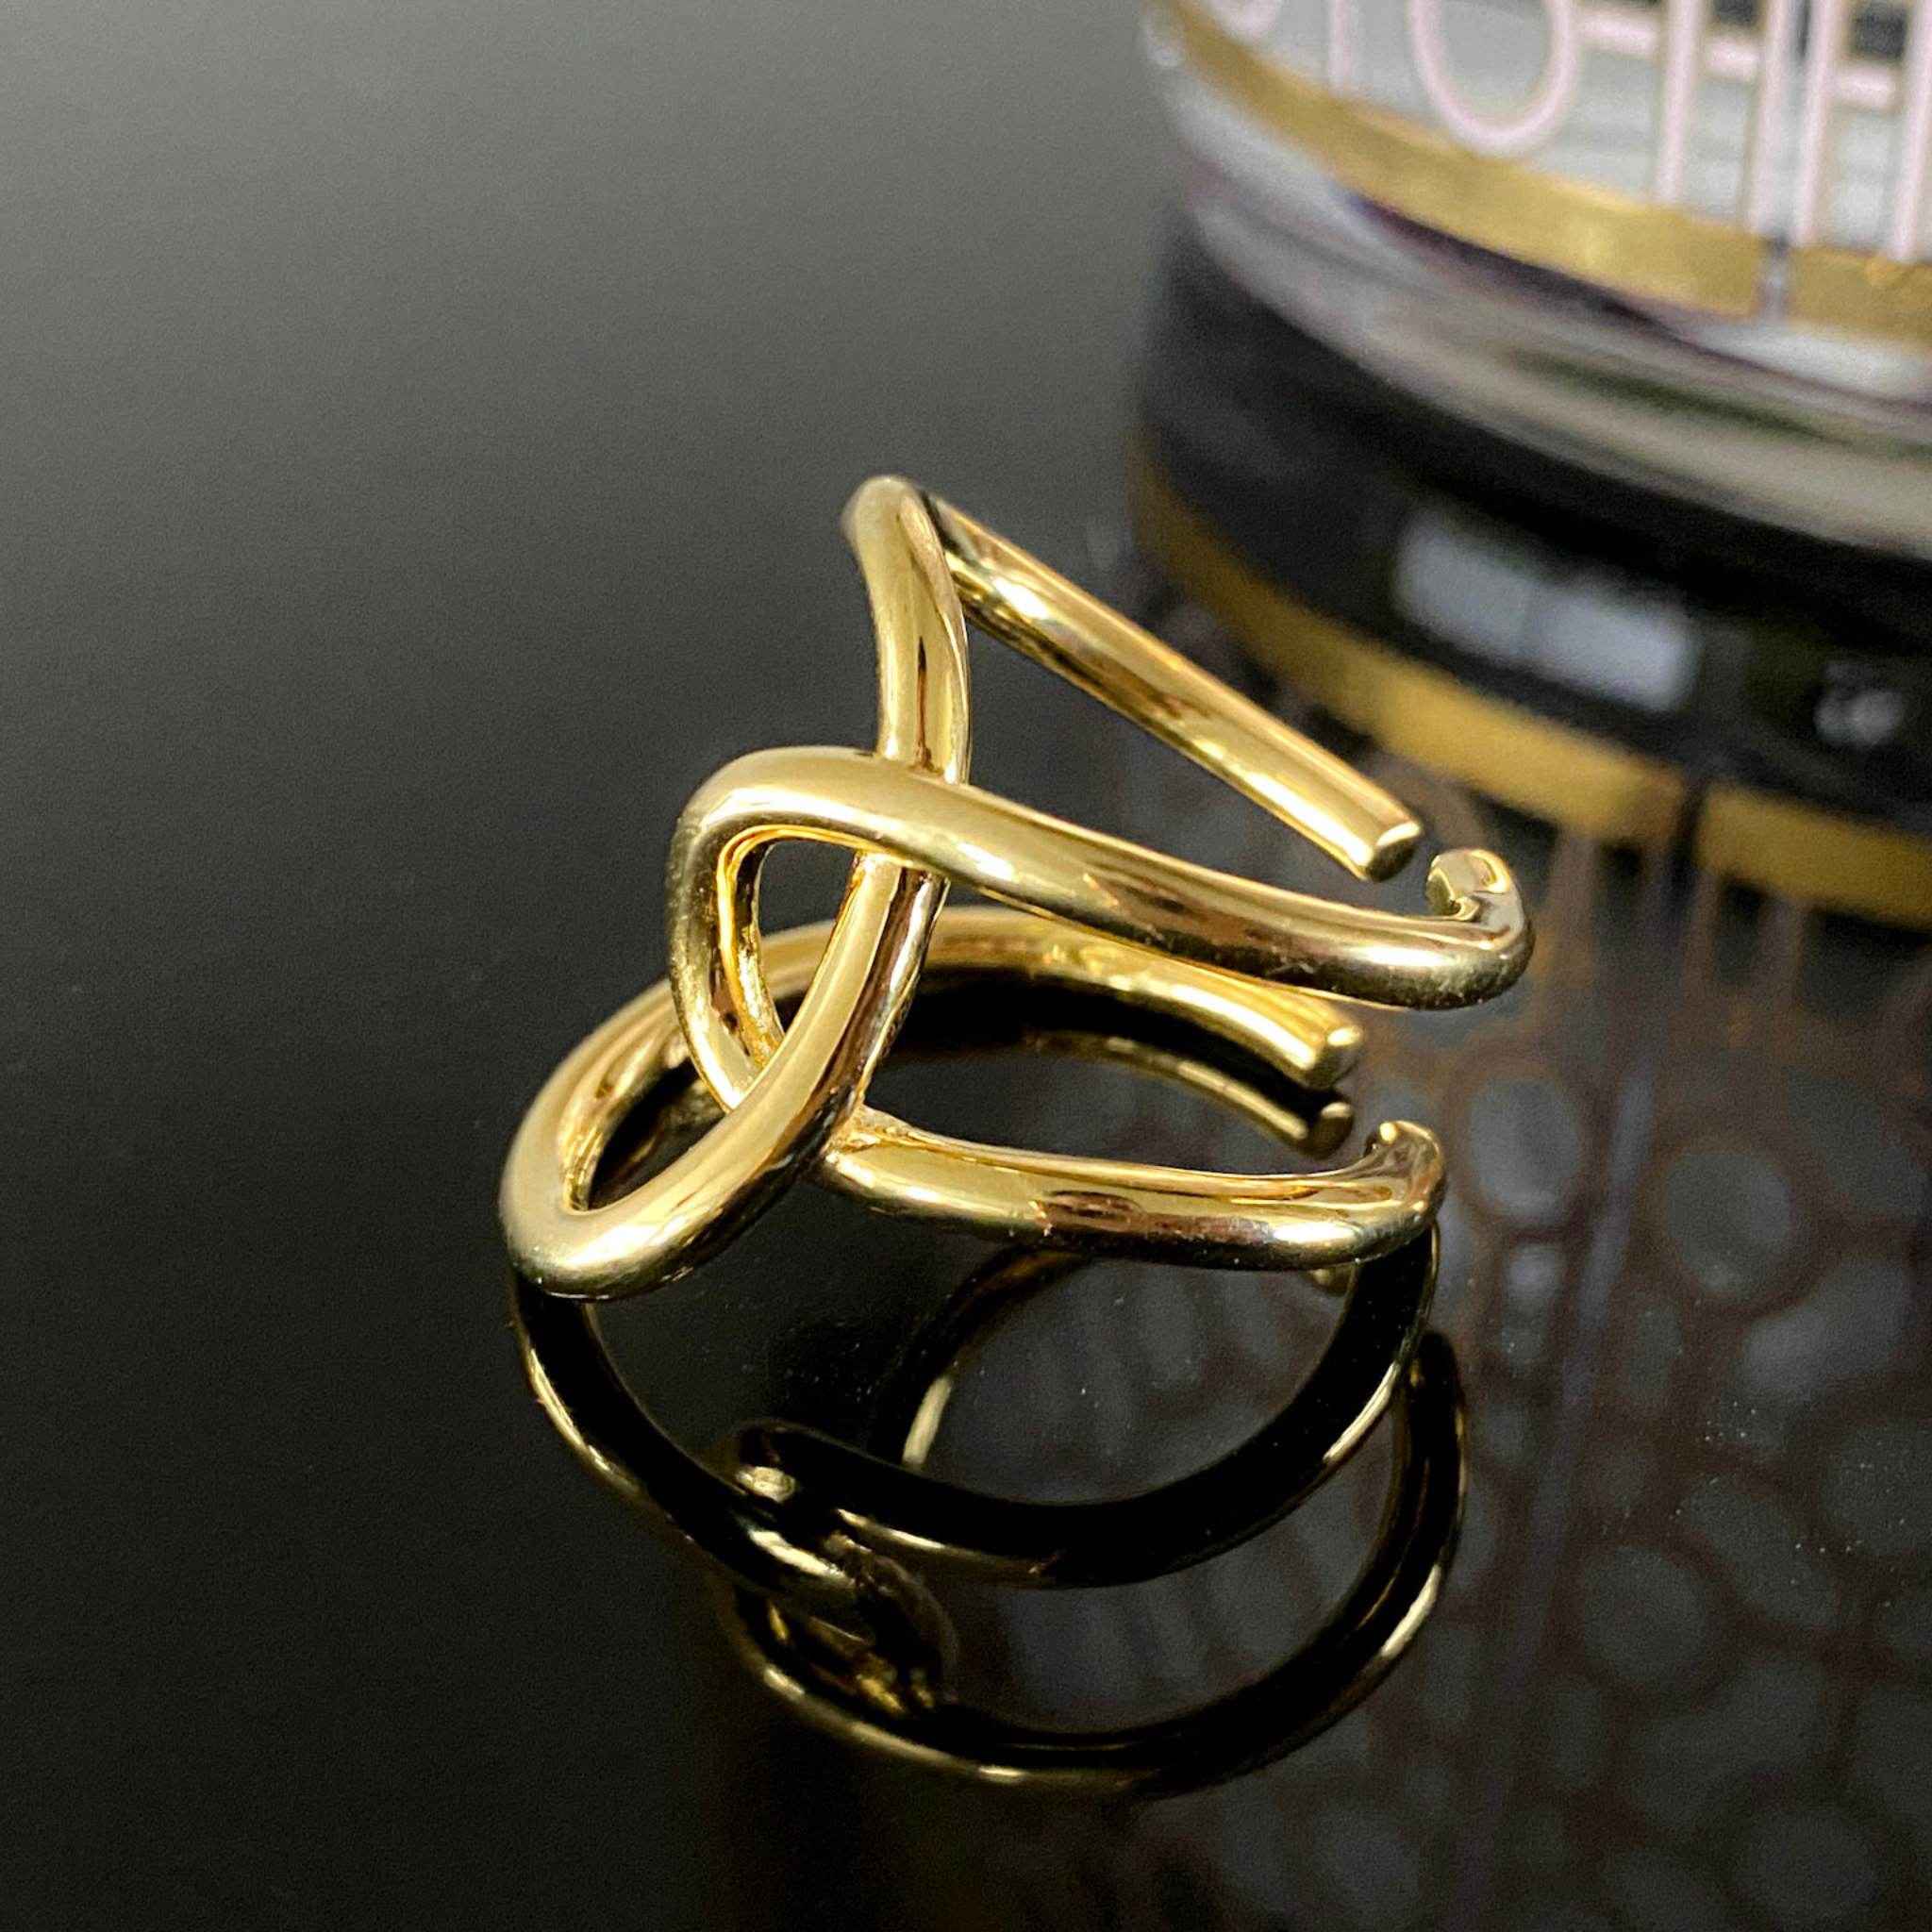 Close-up view of the intricate design of the Asymmetric Twist Ring in sterling silver with 18k gold plating.